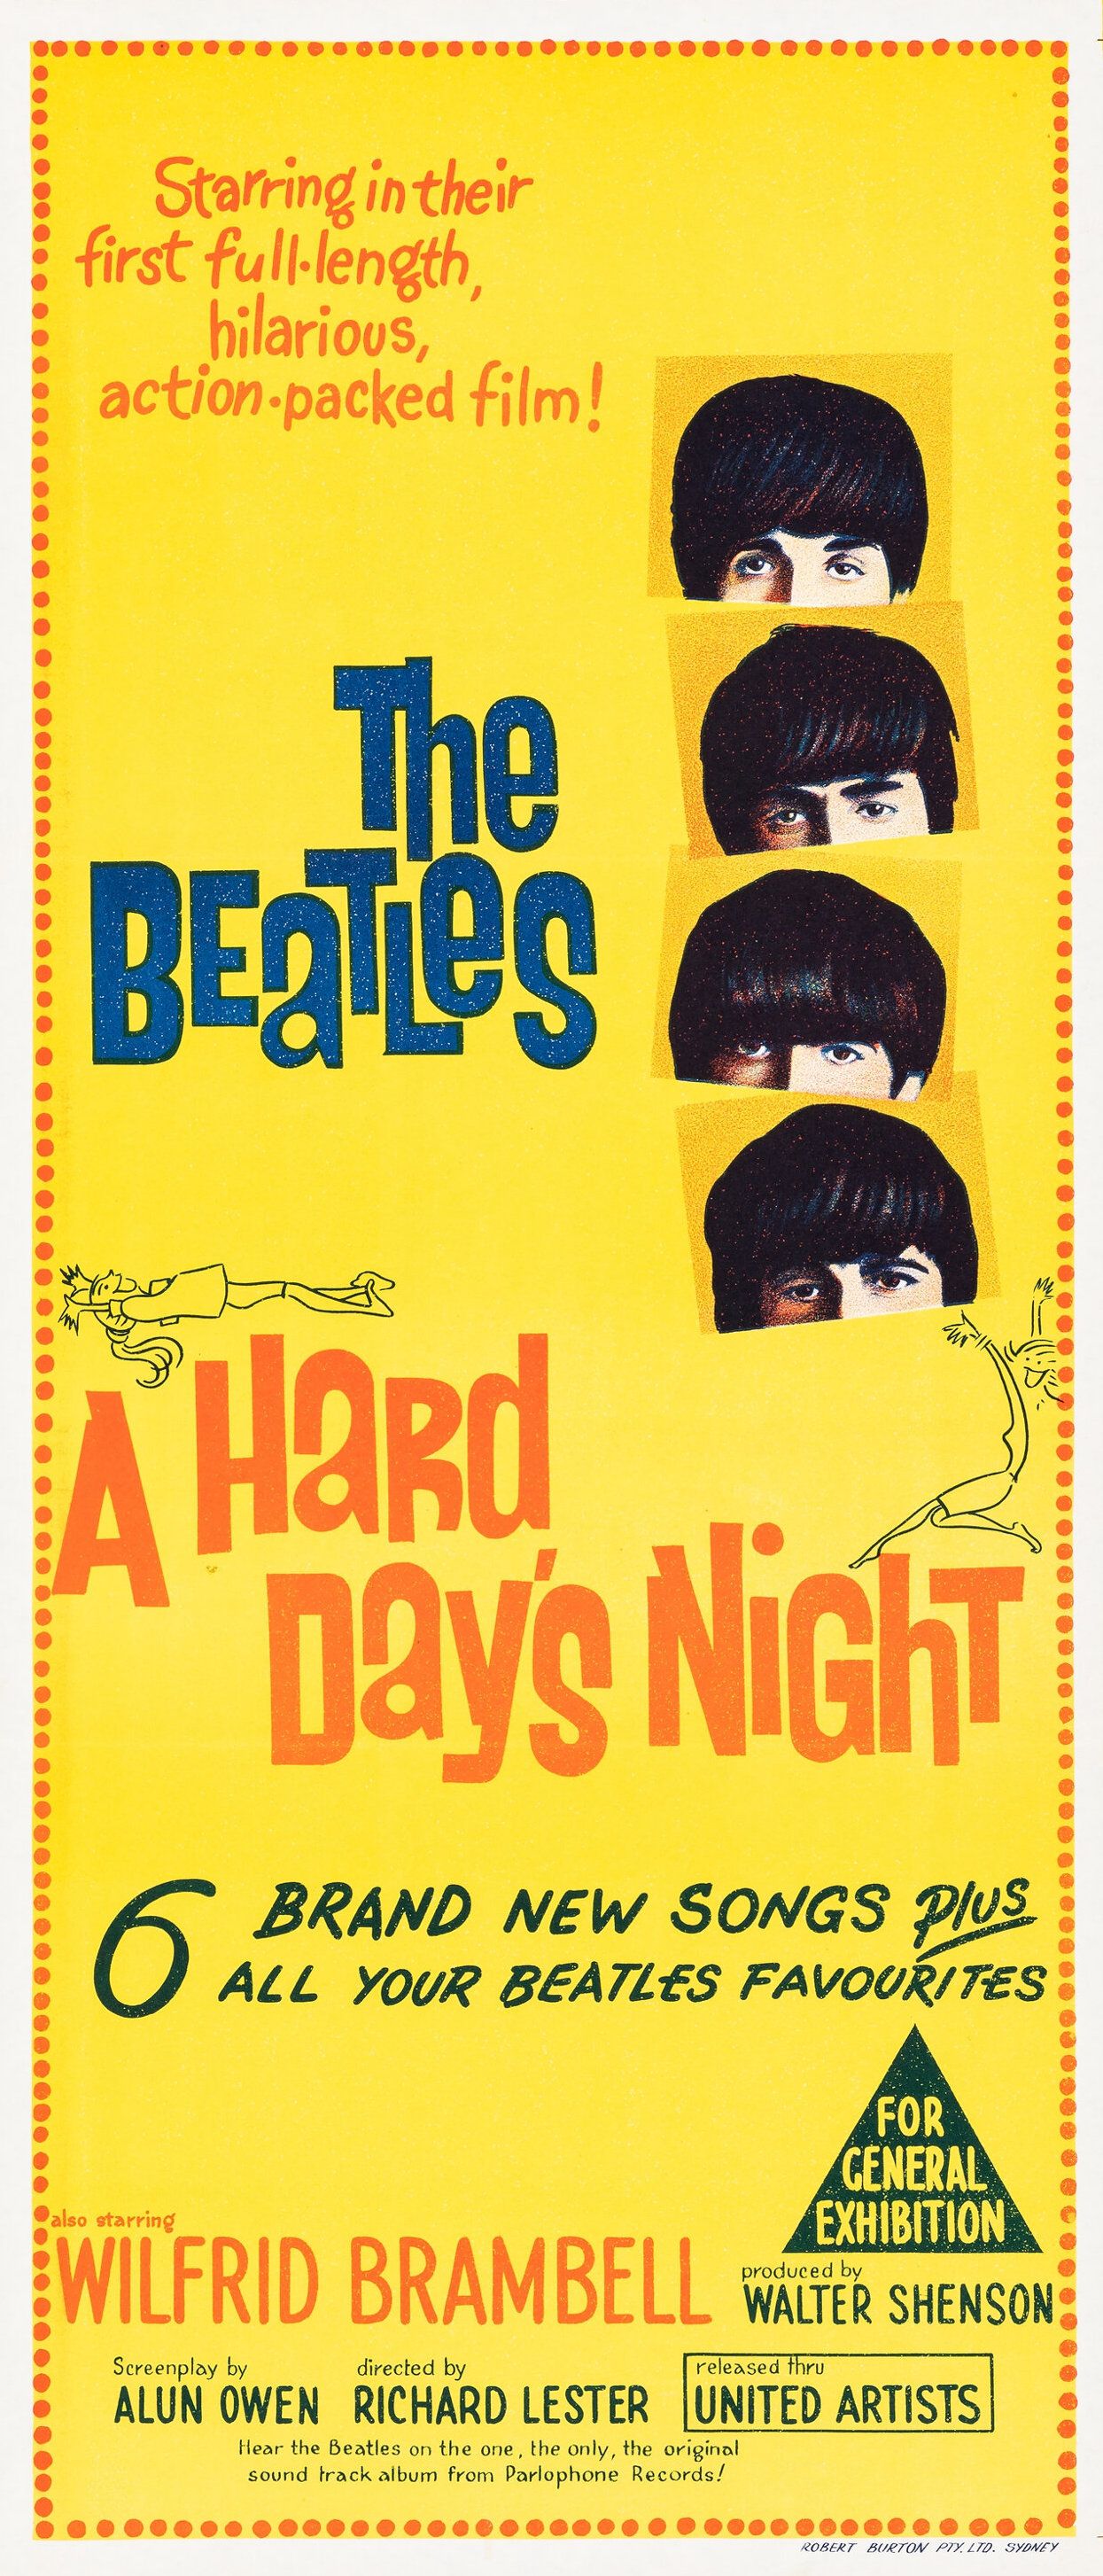 The Beatles A Hard Day's Night Australian Film Poster 1964 Concert Poster